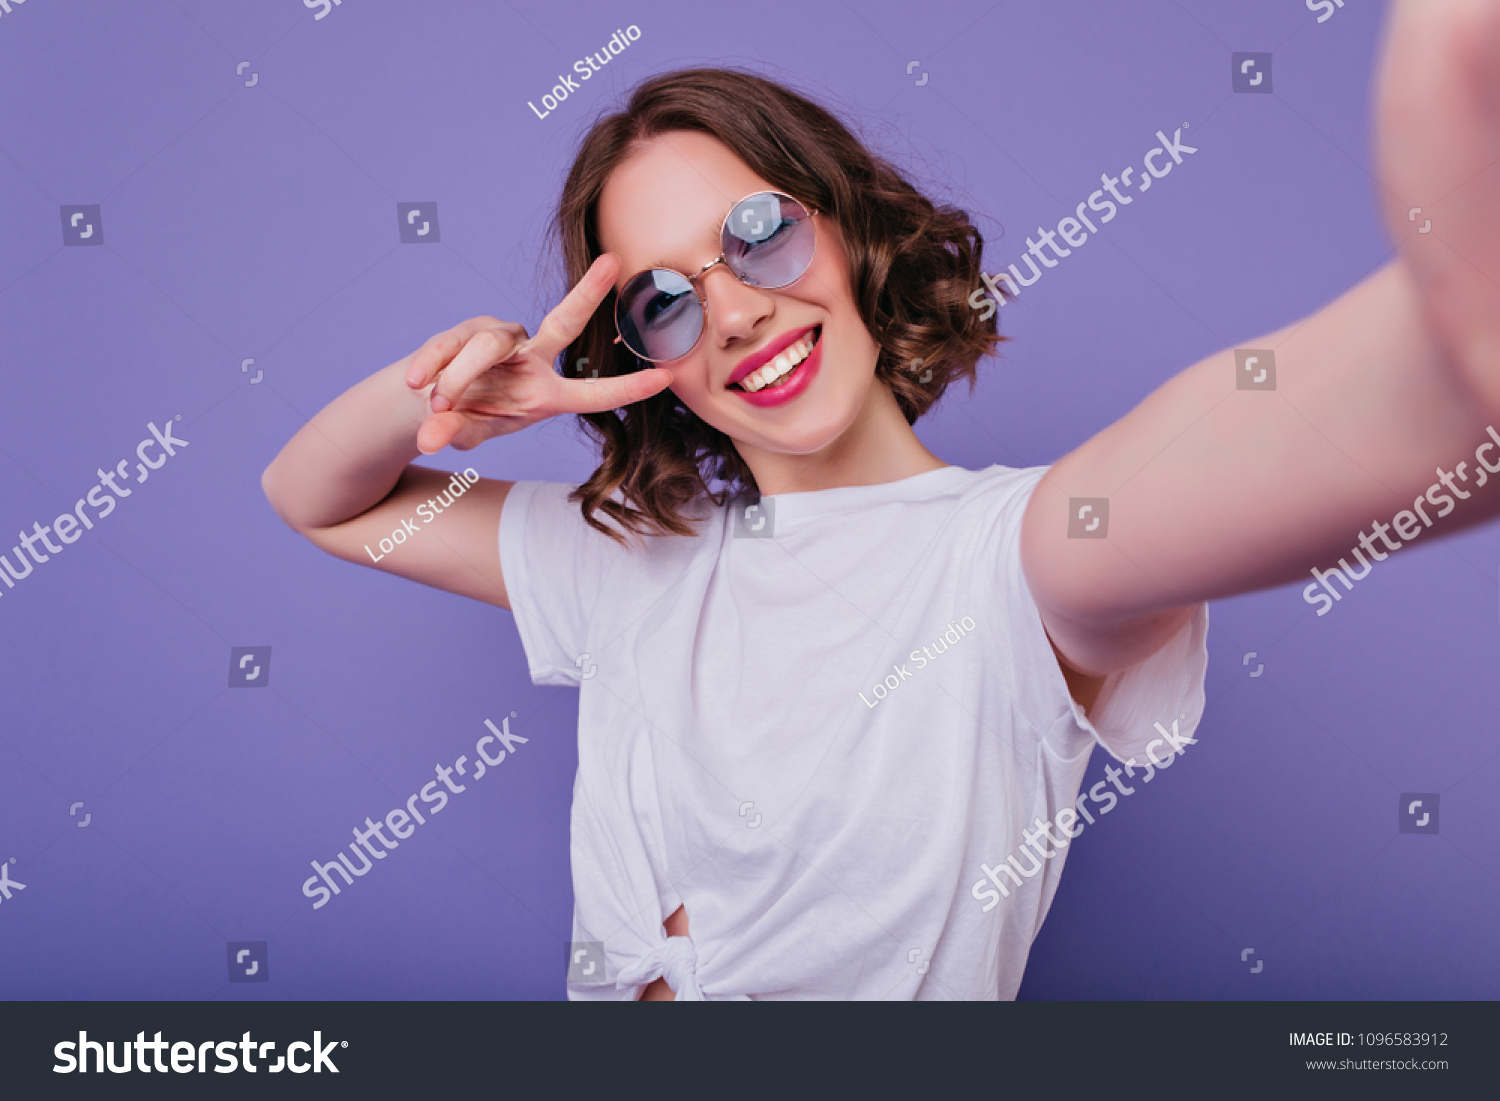 Pleasant girl with tattoo making selfie in studio and laughing. Good-looking young woman with brown wavy hair taking picture of herself on bright purple background. #1096583912